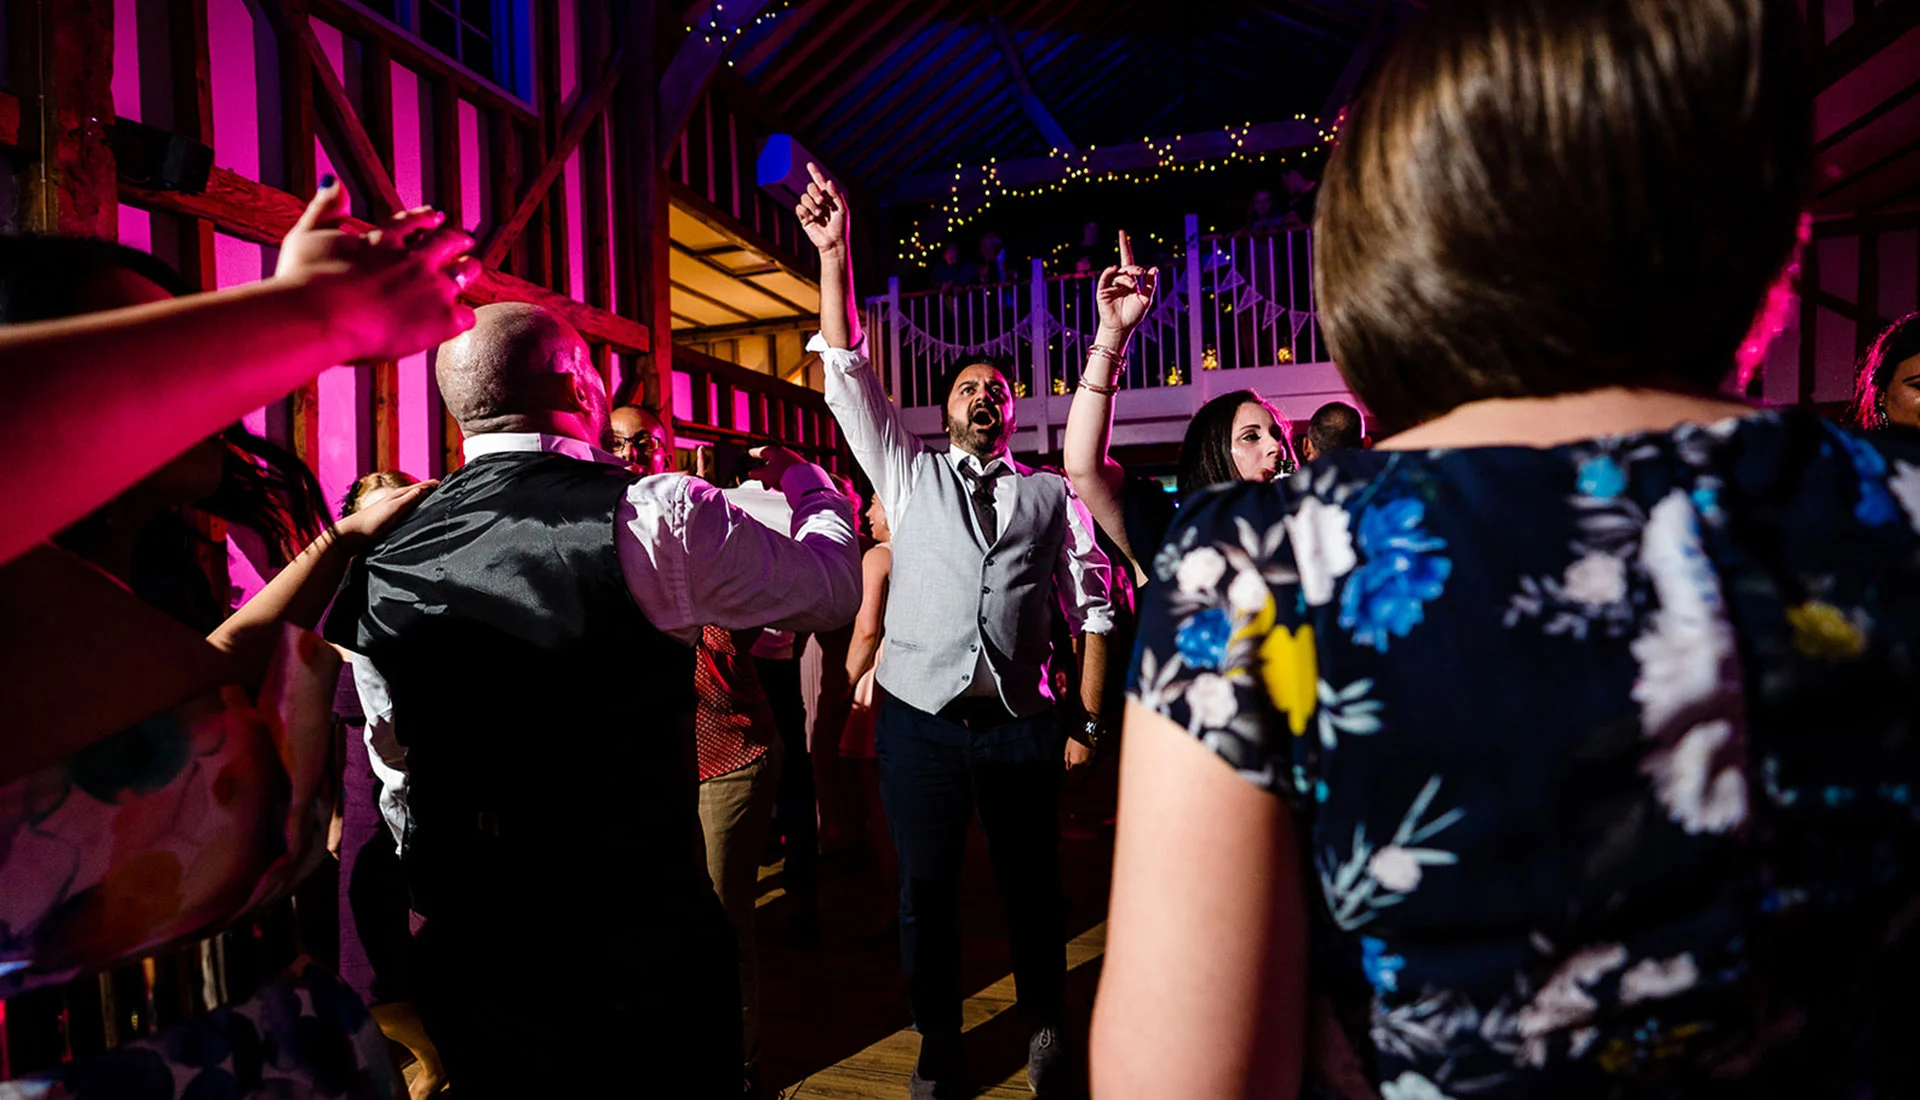 UK Garage bangers that must be played at your wedding reception